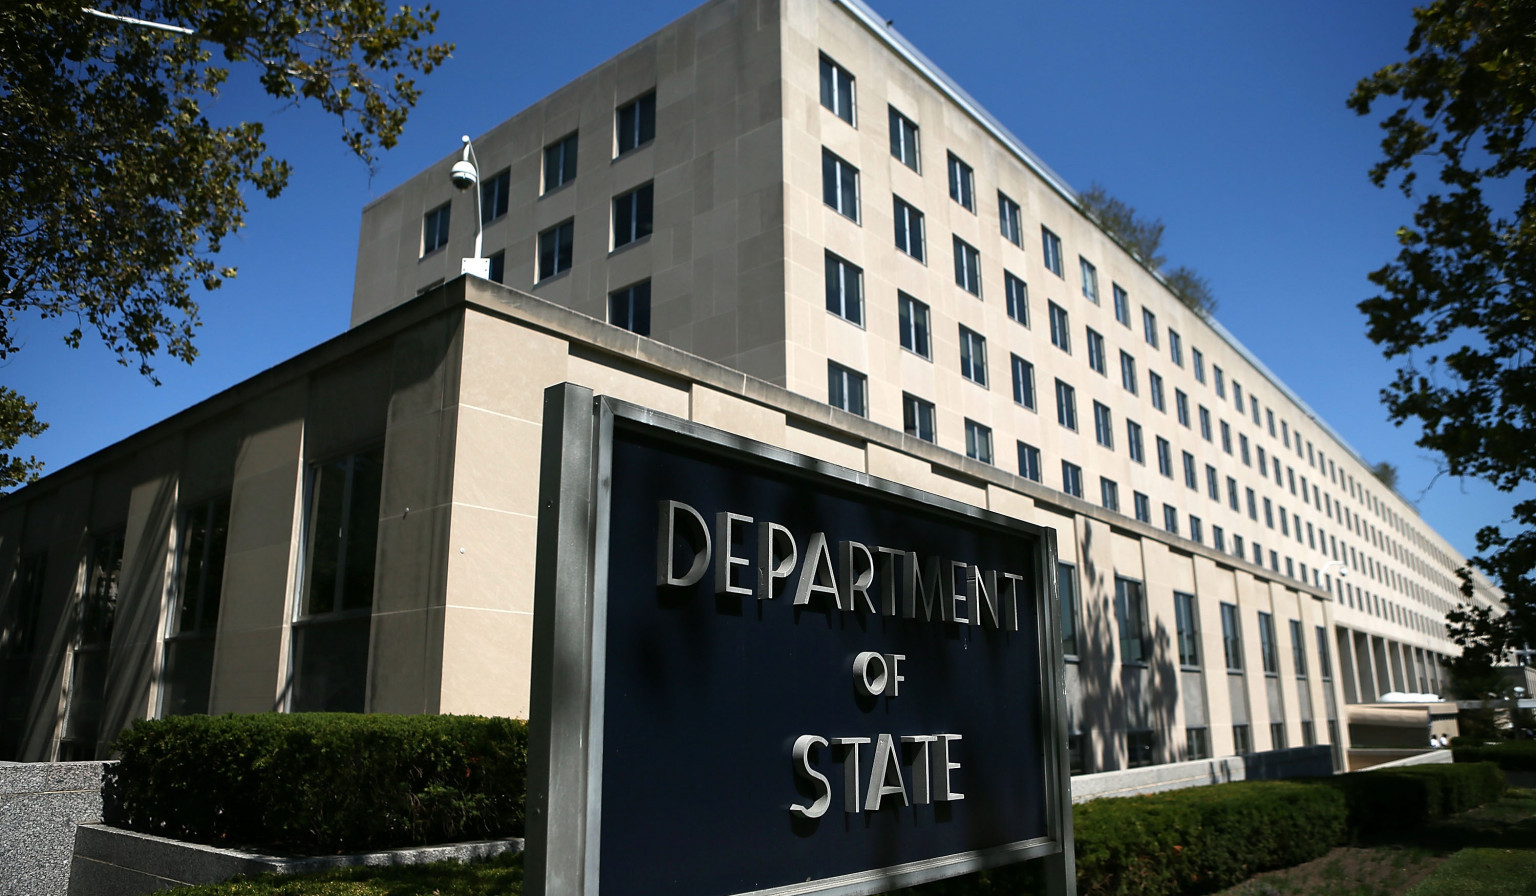 US calls for restoration of free movement through Lachin Corridor as soon as possible: State Department